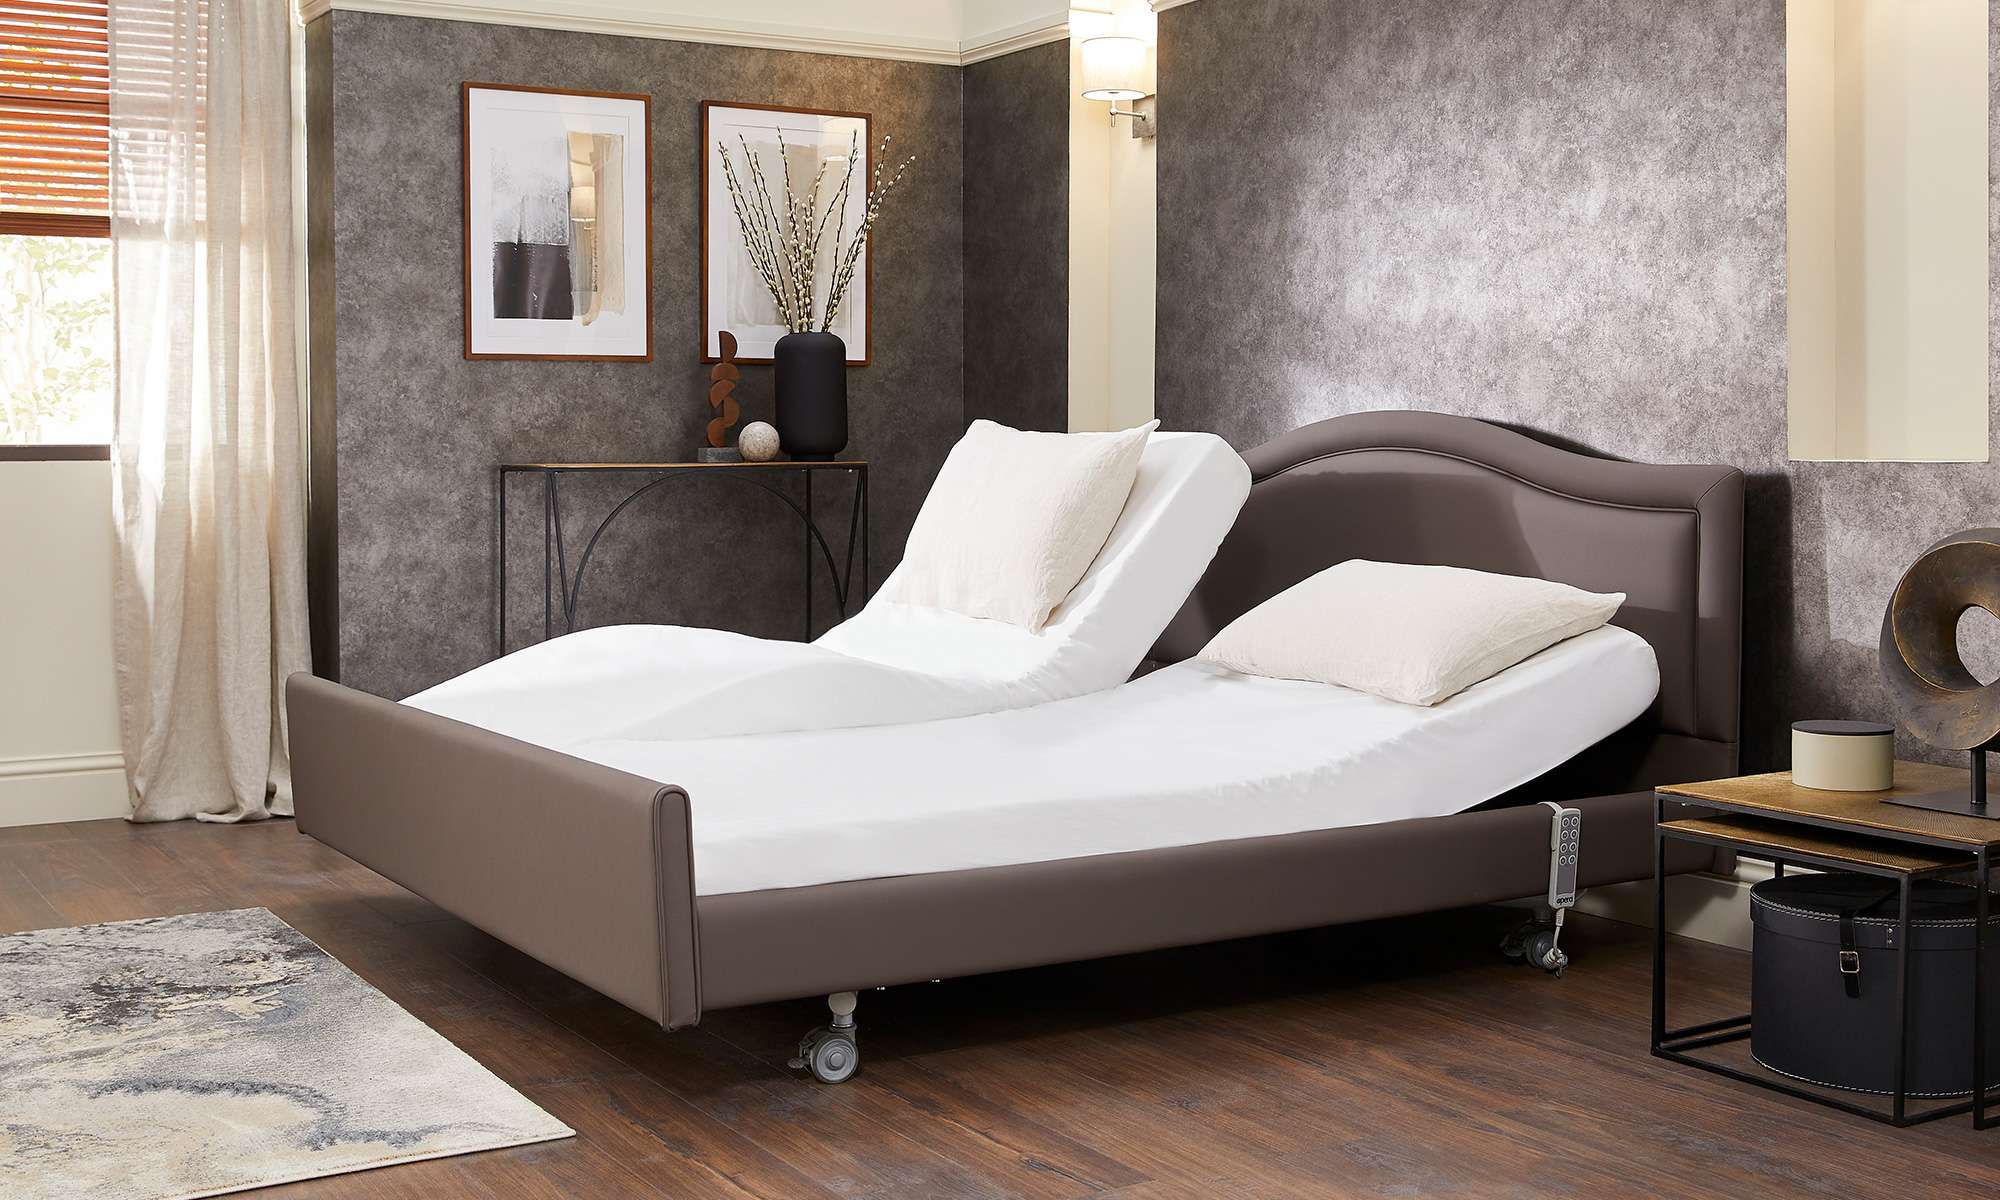 Lifestyle shot of a double electric adjustable bed with one mattresses profiling. The picture is in a bedroom with a single rug.